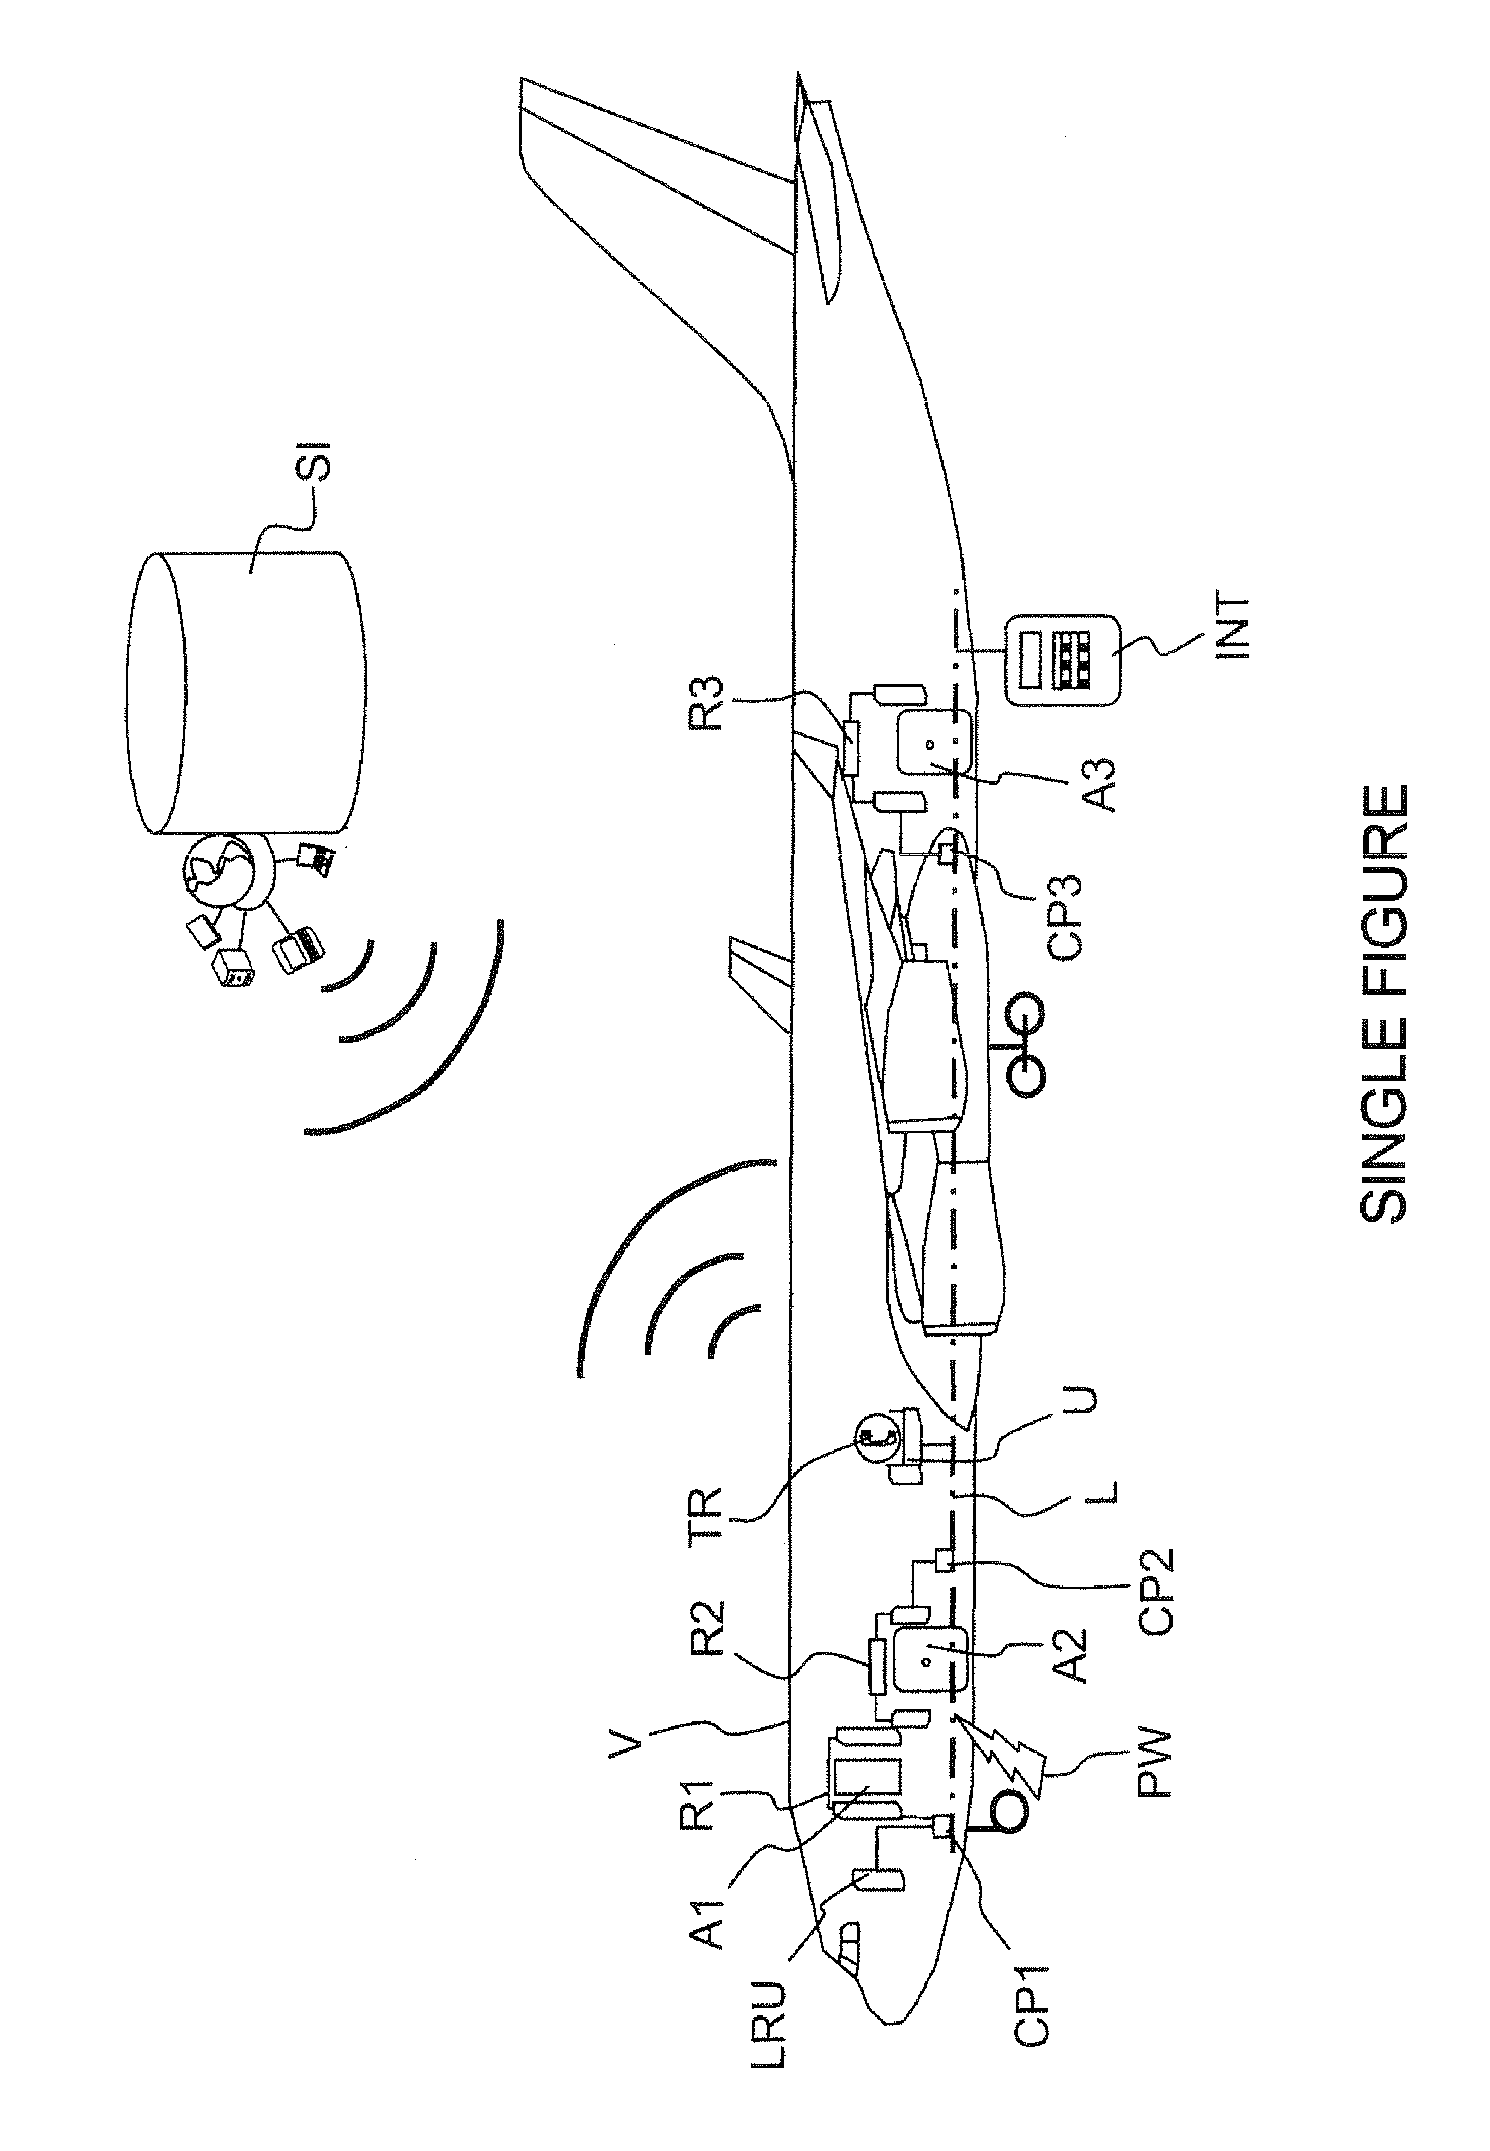 Onboard System for Identifying and Monitoring the Content of an Aircraft